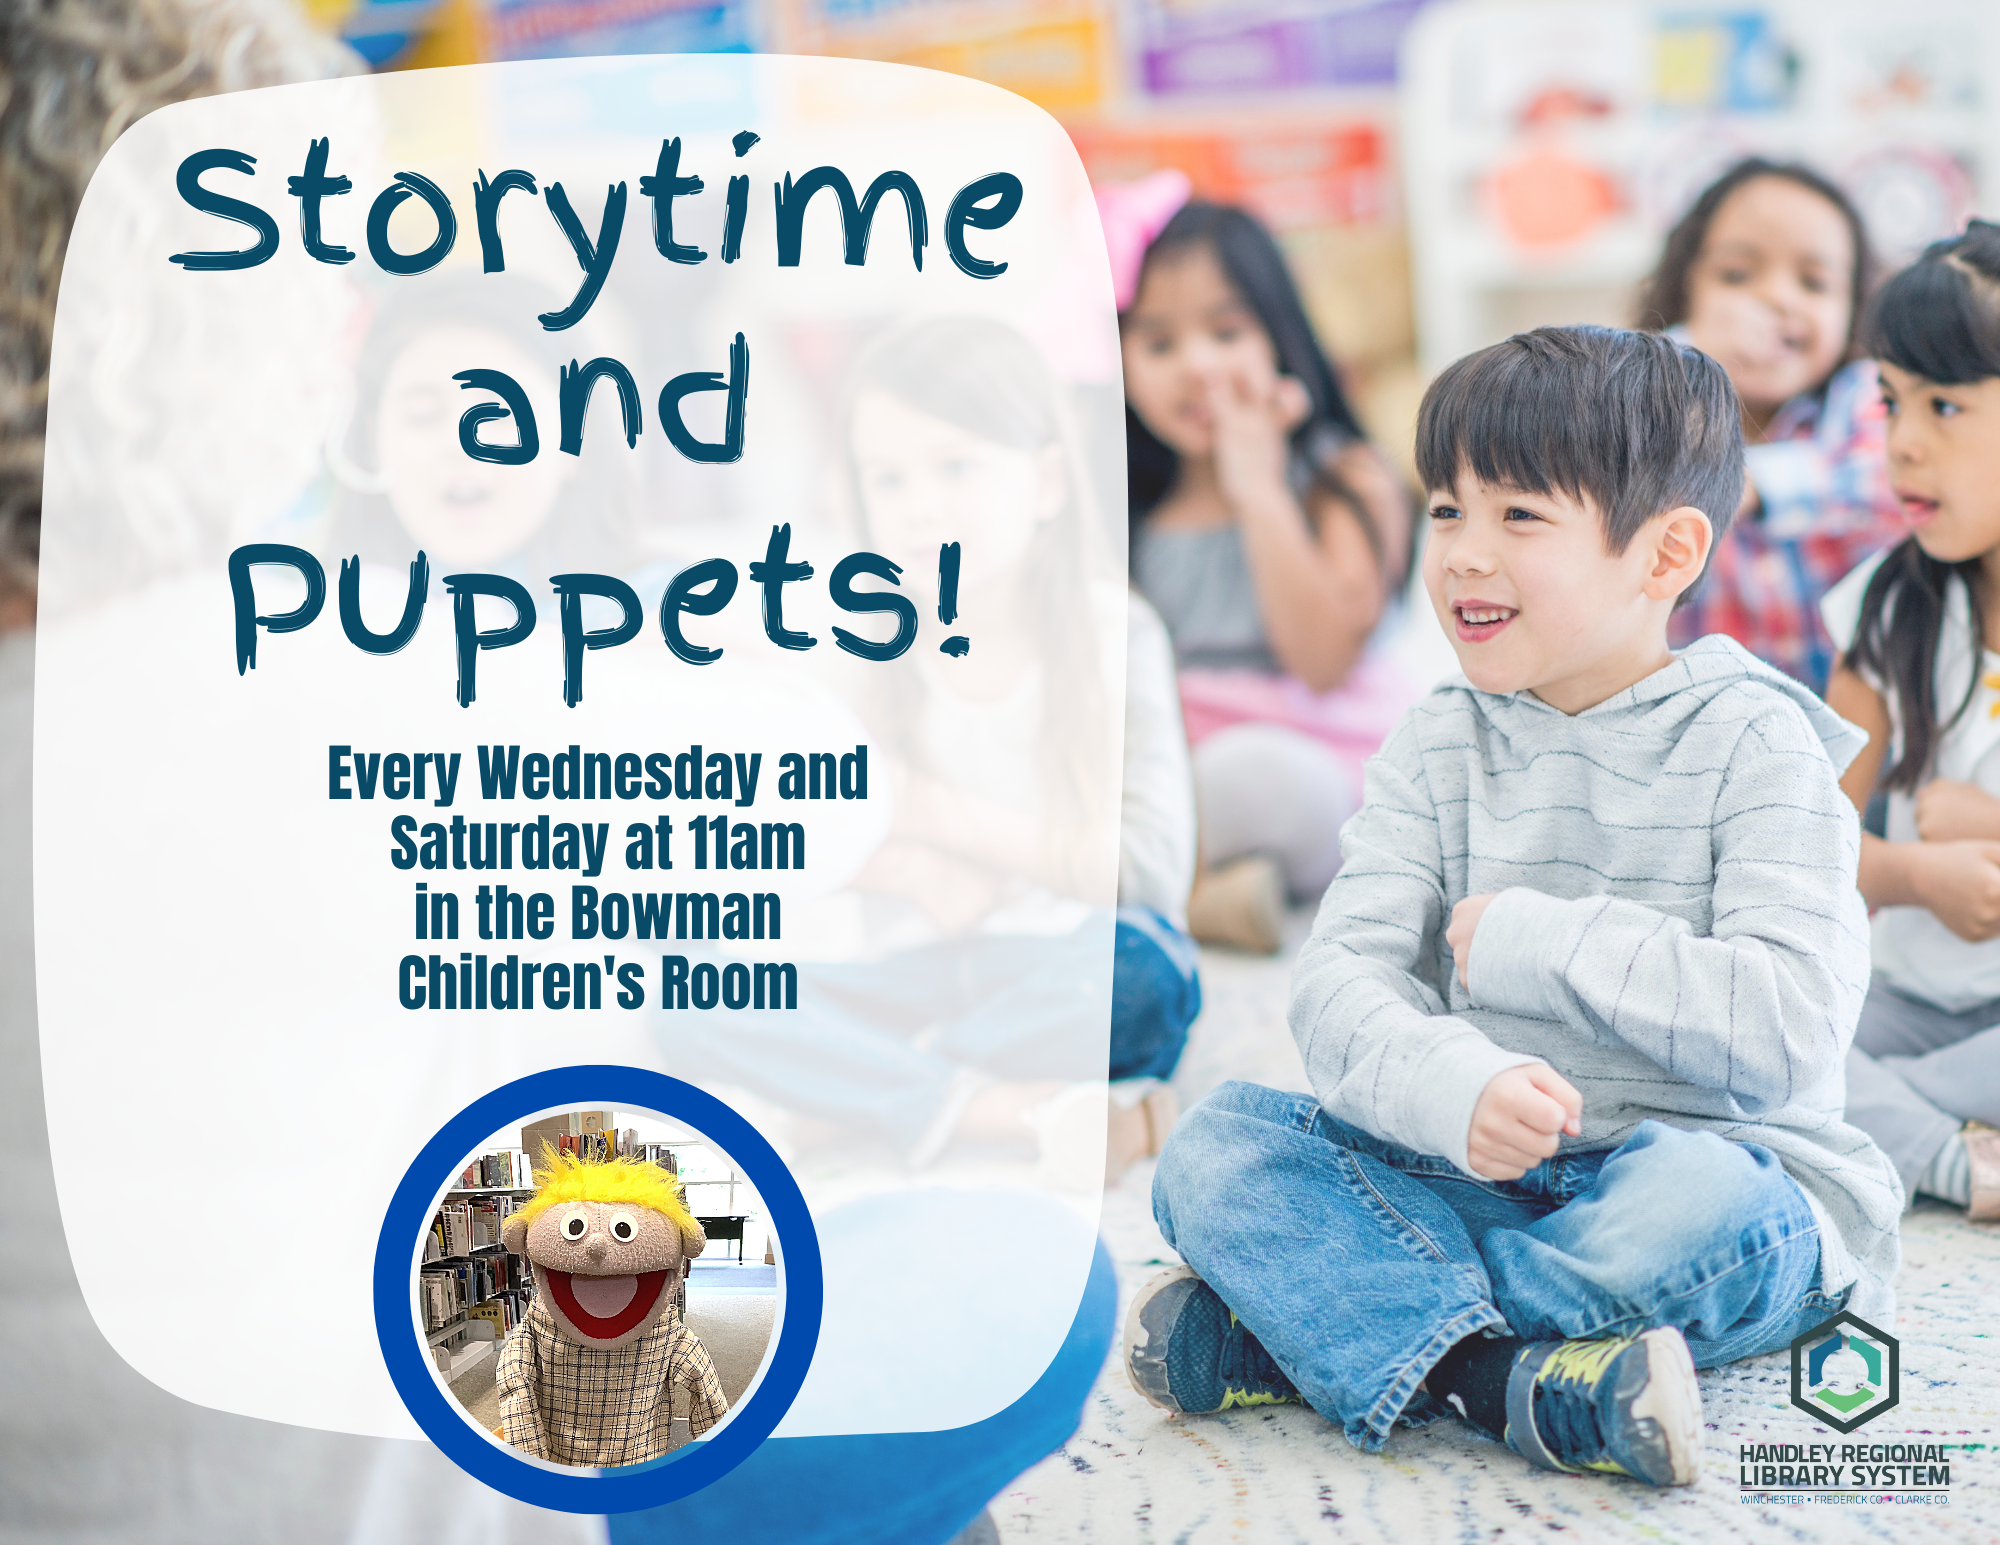 Storytime and Puppets promotional poster showing smiling children sitting and listening